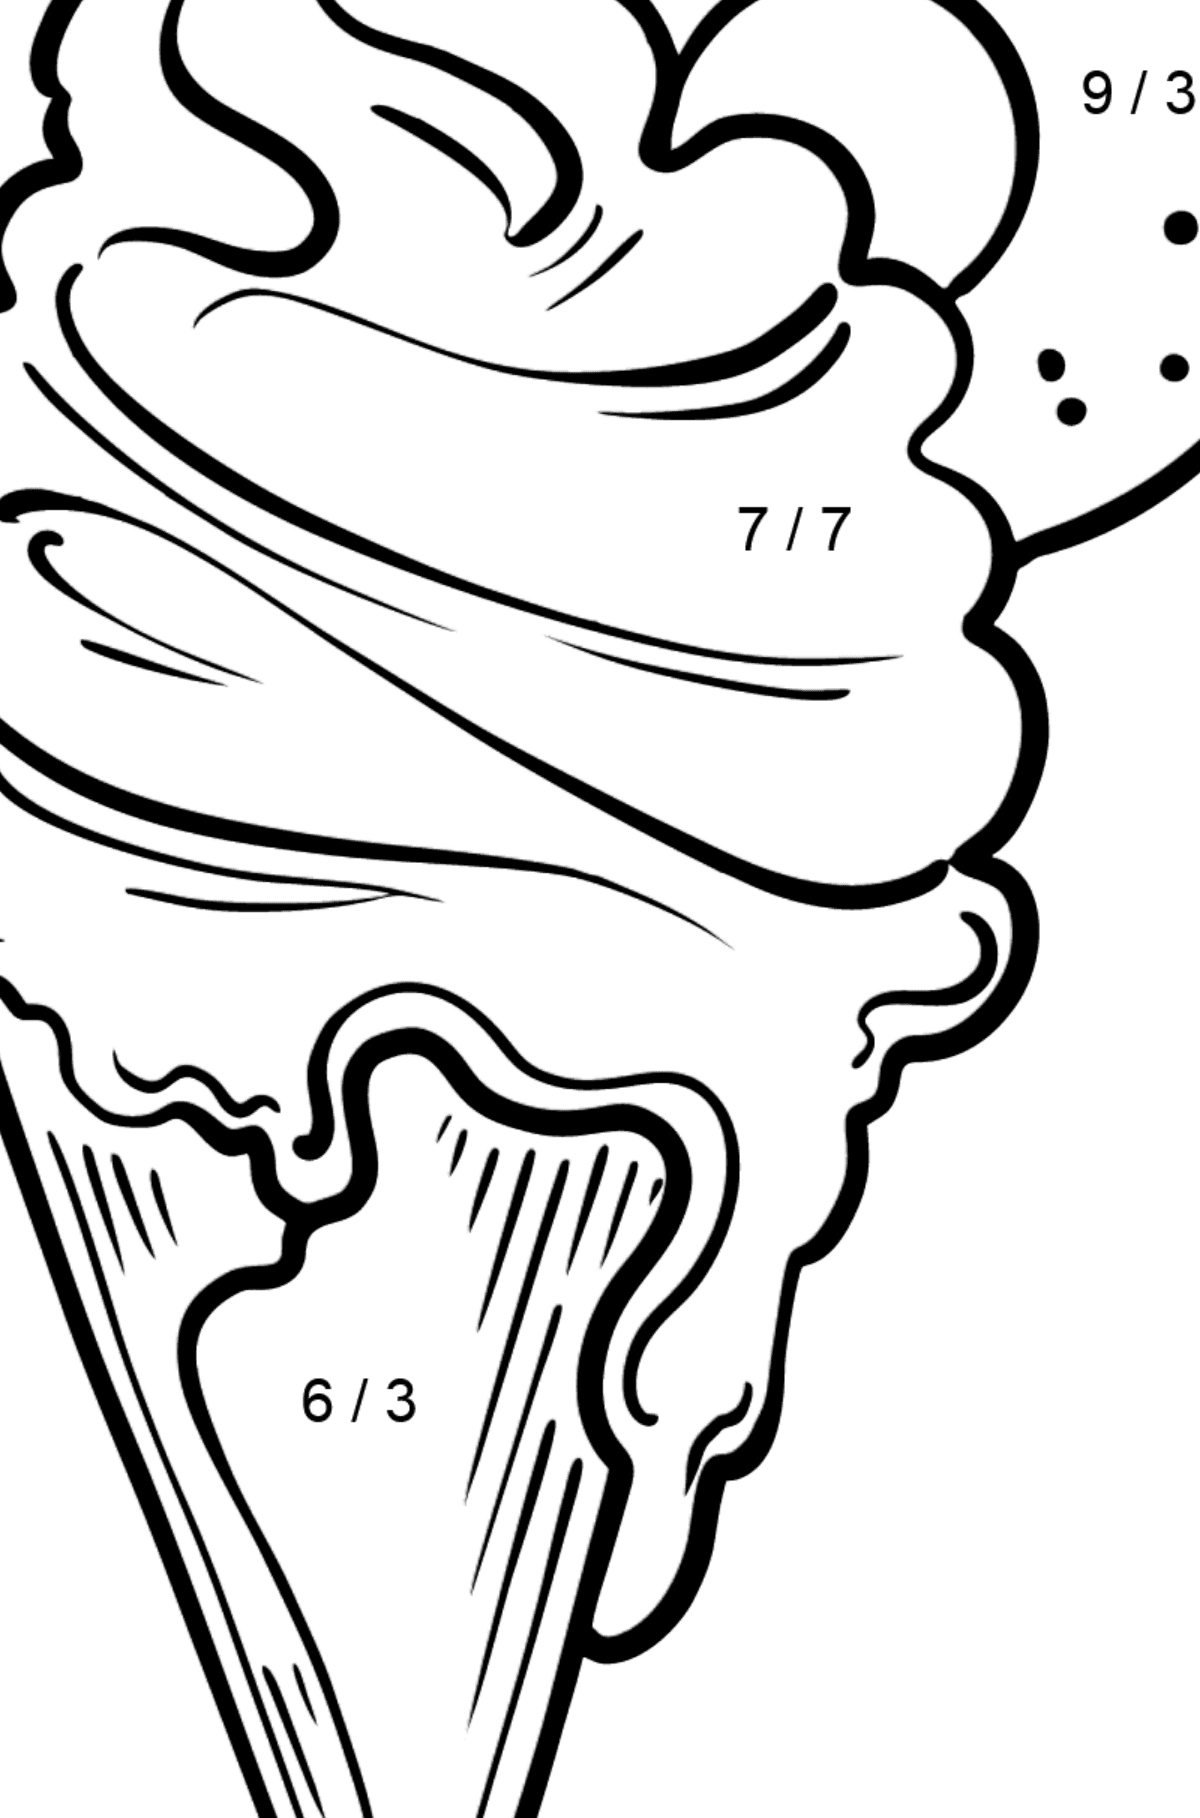 Ice Cream Cone and Pink Lollipop coloring page - Math Coloring - Division for Kids